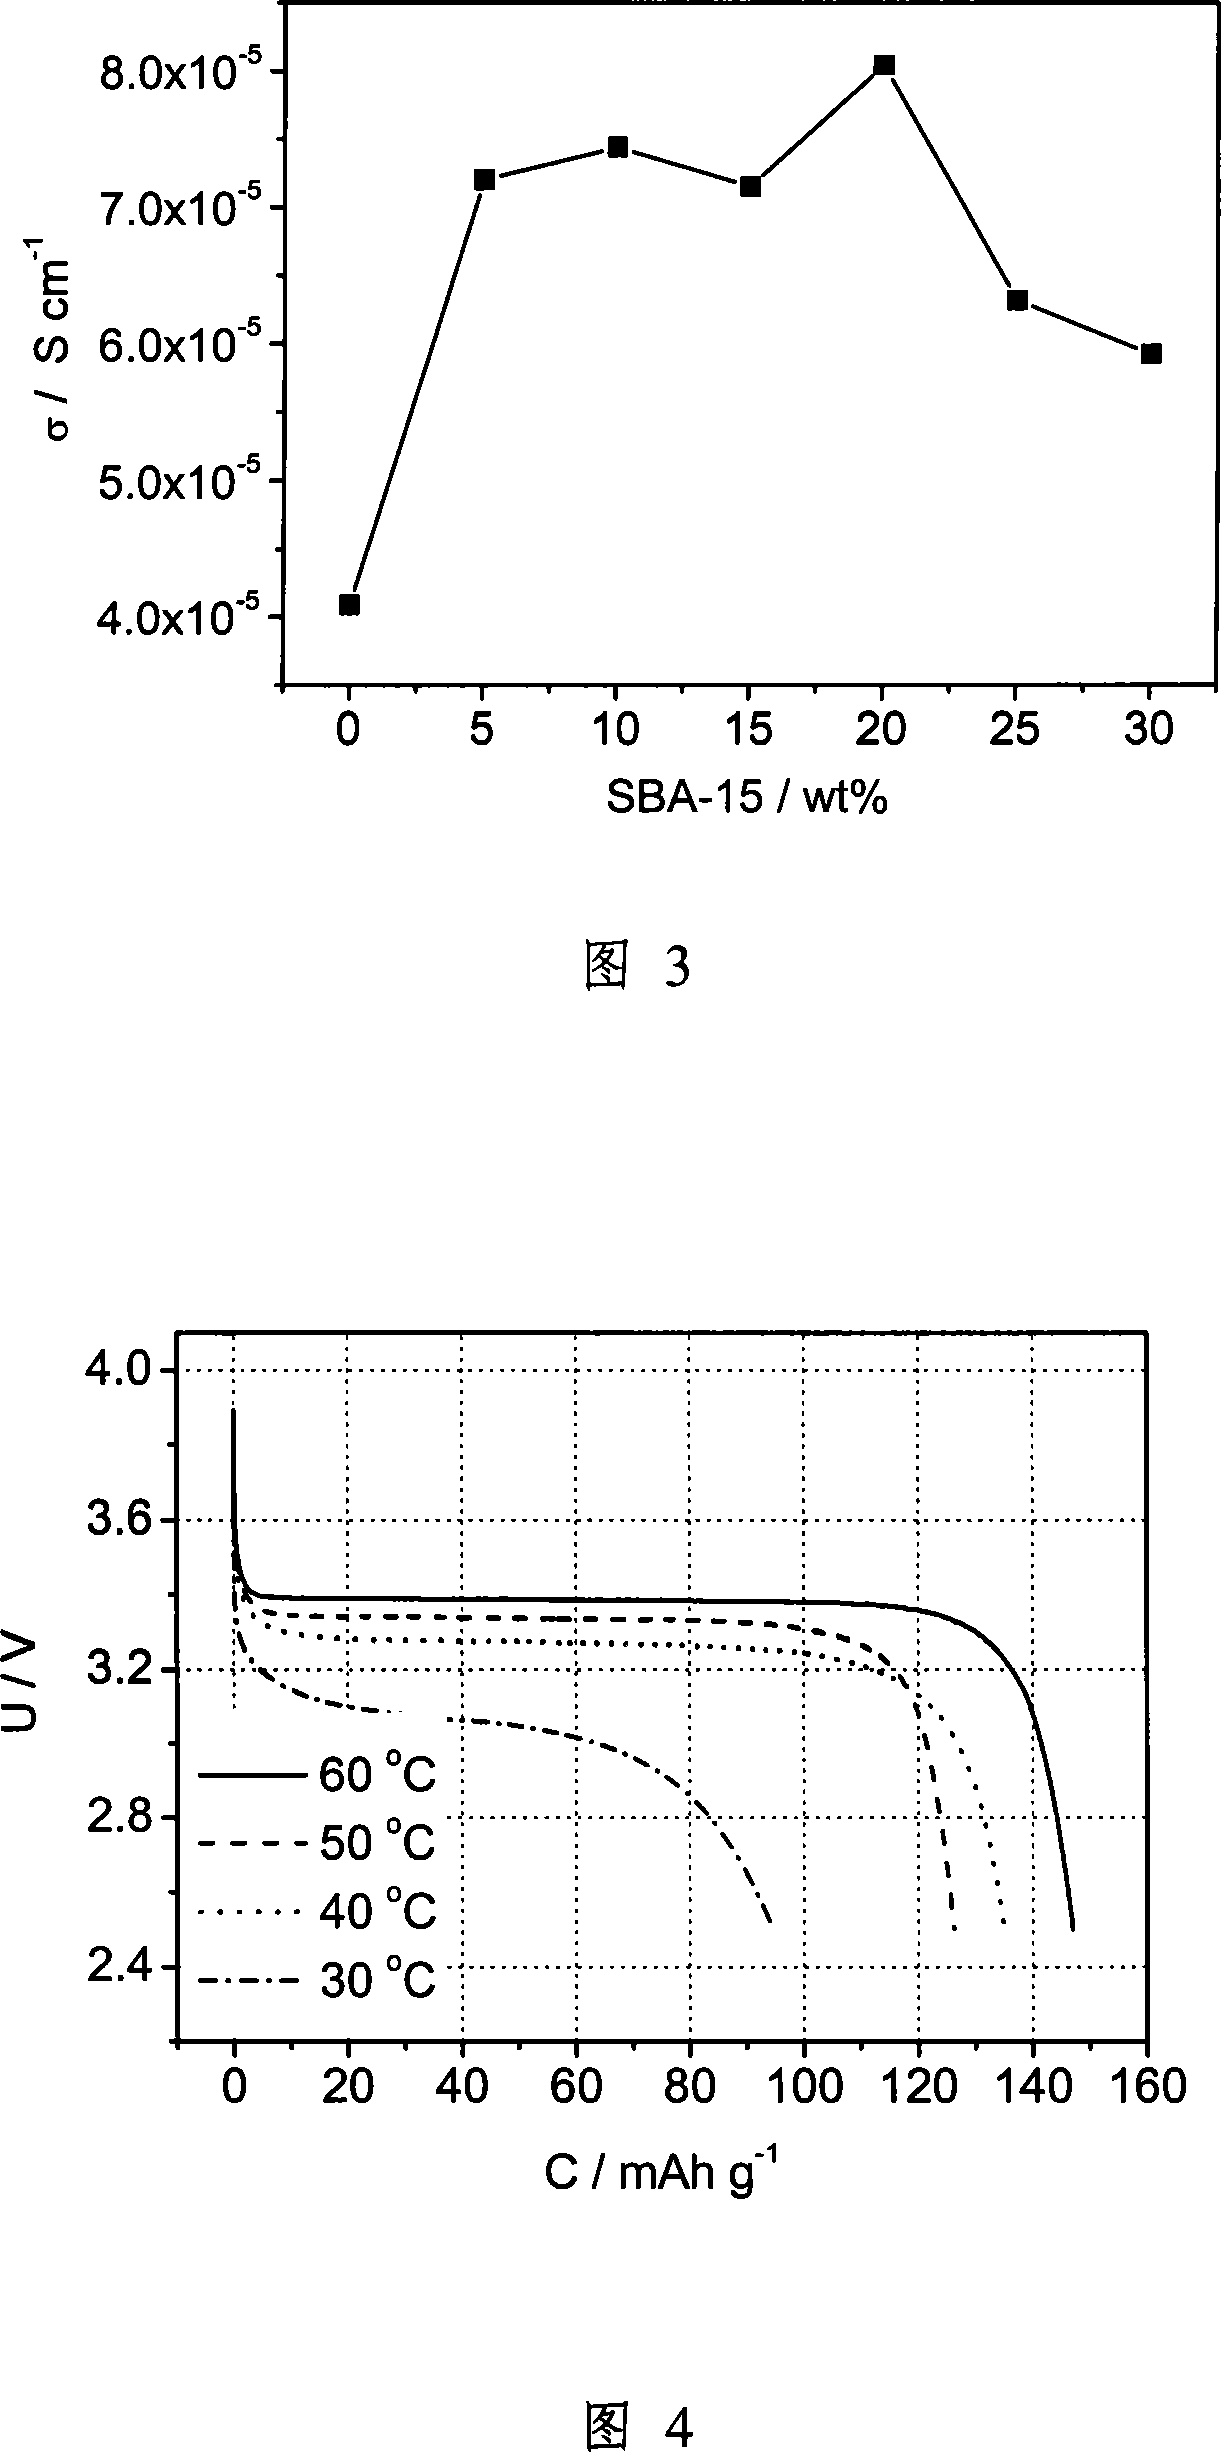 Co-polymer based polymer electrolyte material for lithium battery, compound electrolyte film and its preparation method